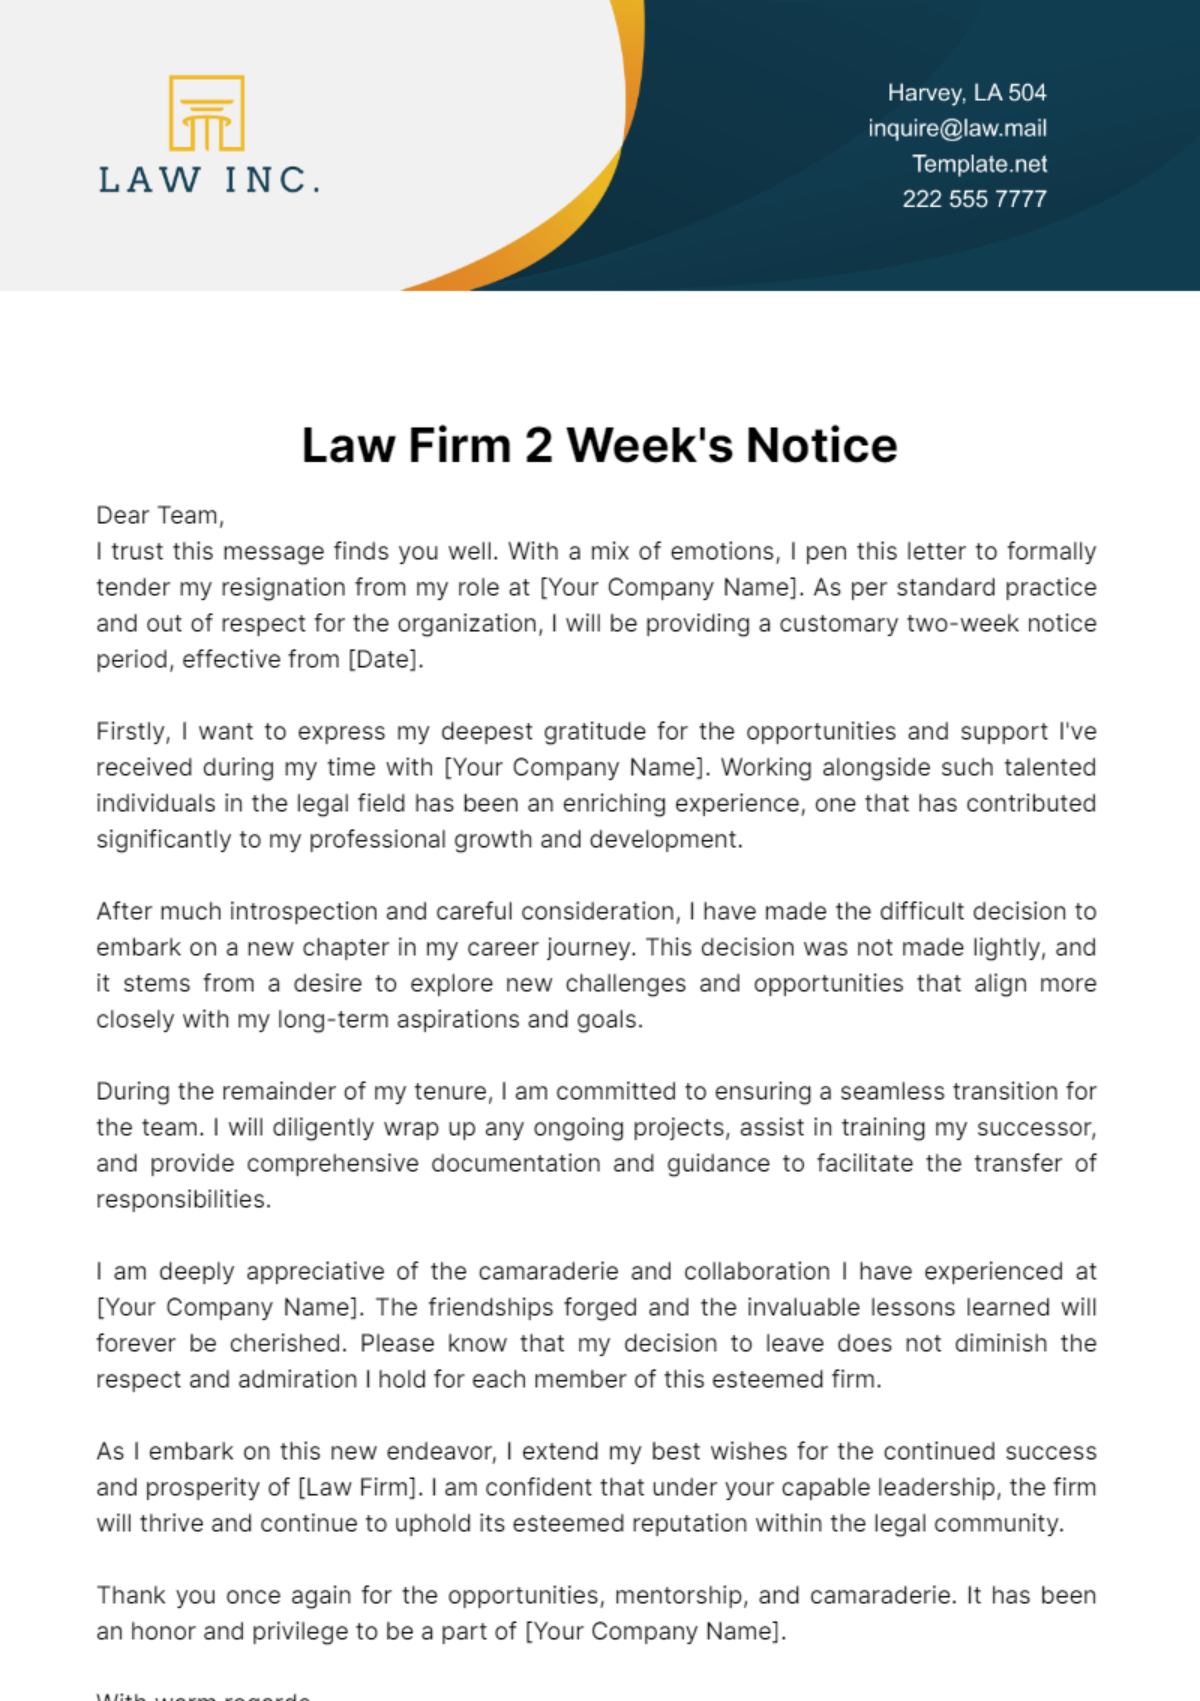 Free Law Firm 2 Week's Notice Template